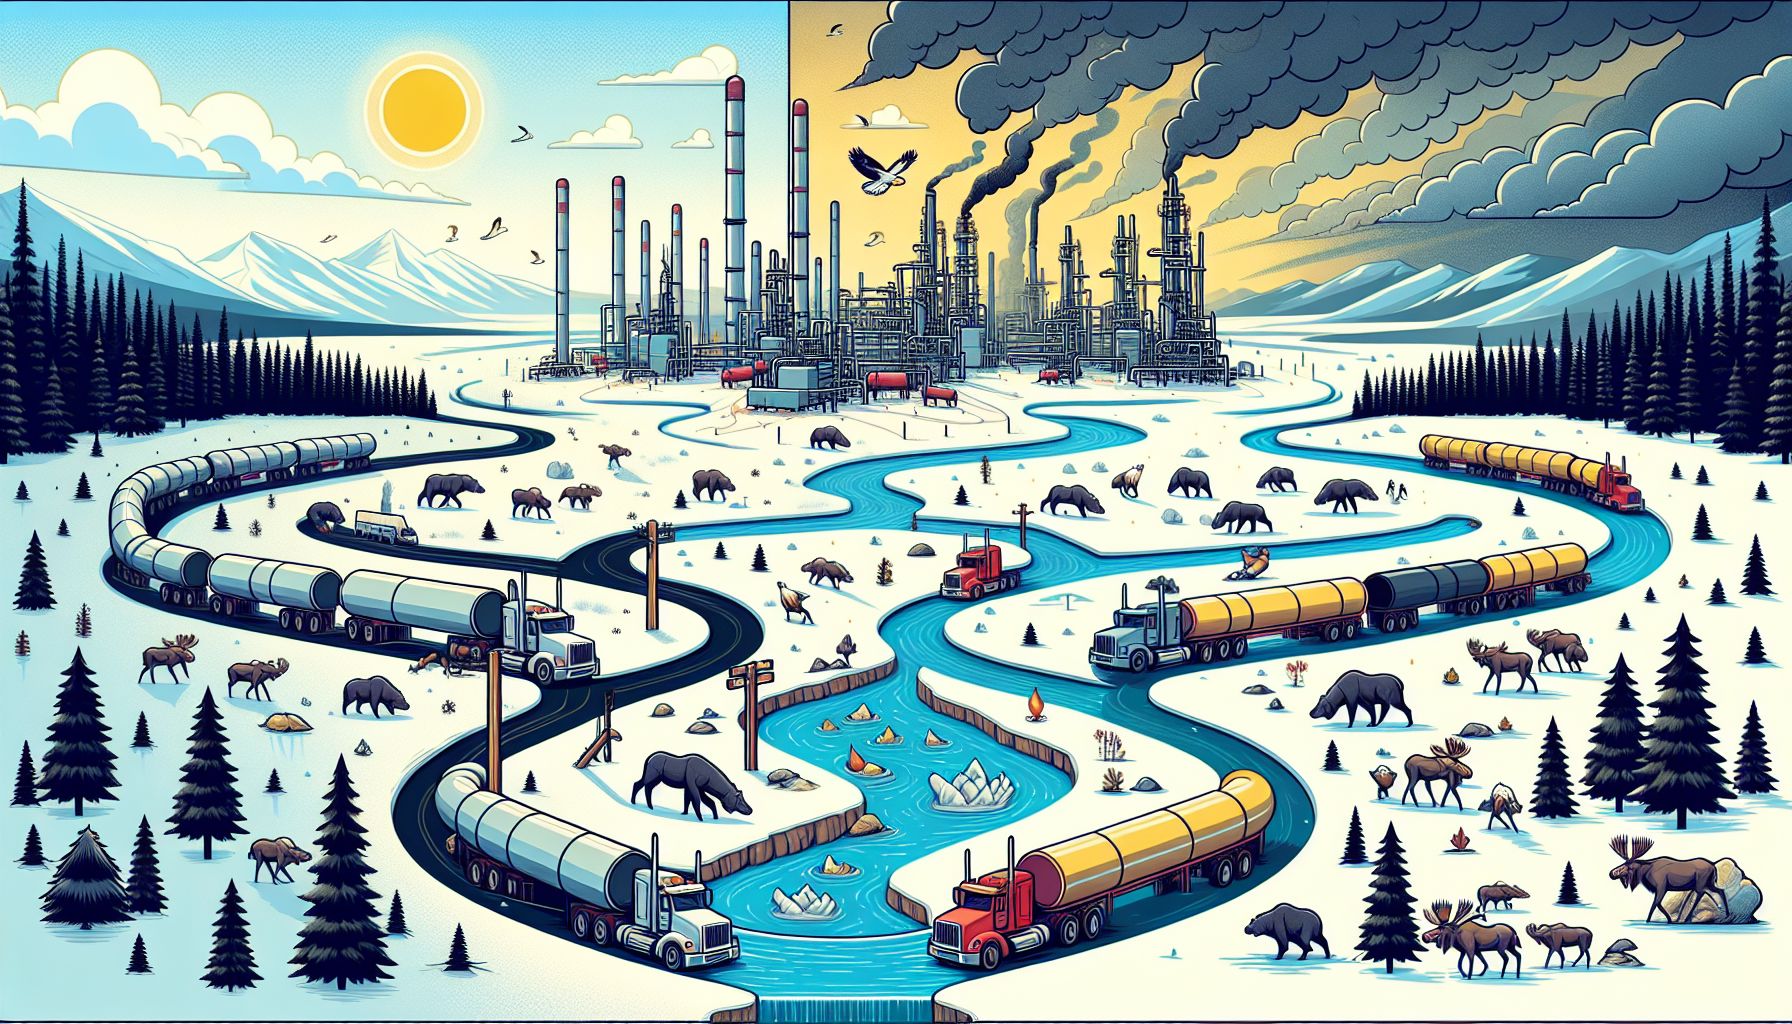 sxwsngvvik - The Enigmatic Journey of the Canadian Oil & Gas Industry